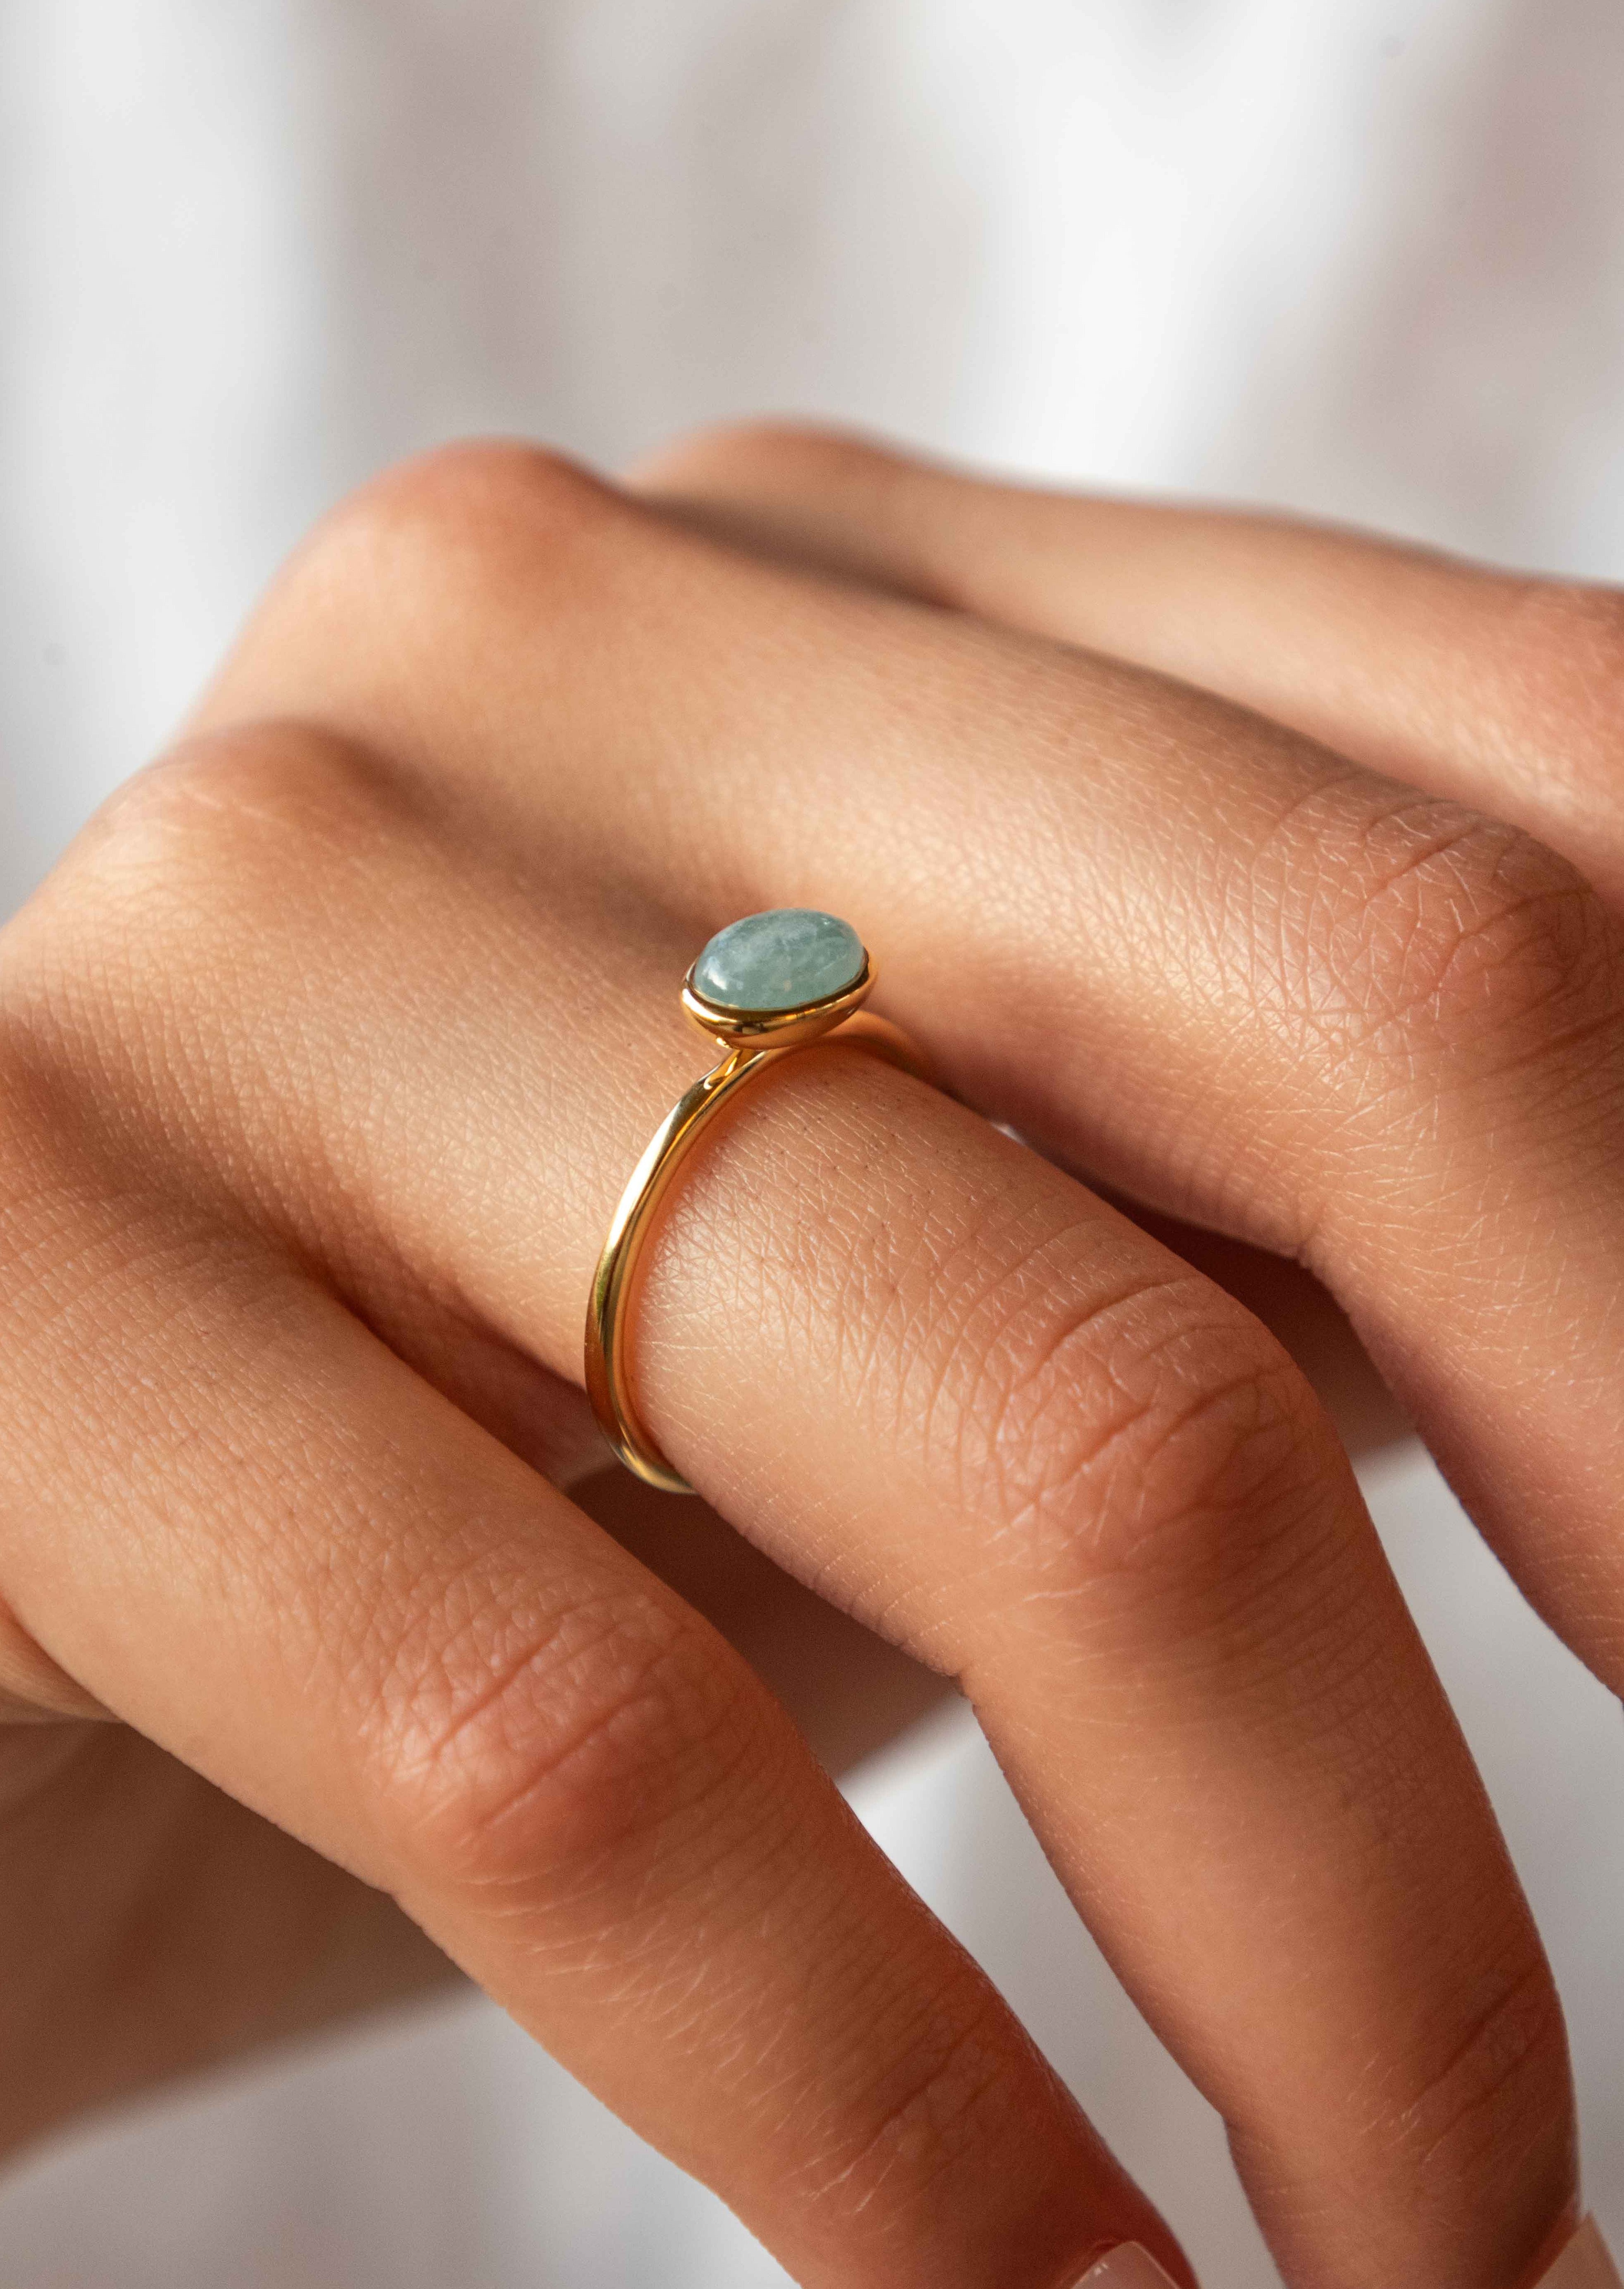 The Buttercup Aquamarine Ring